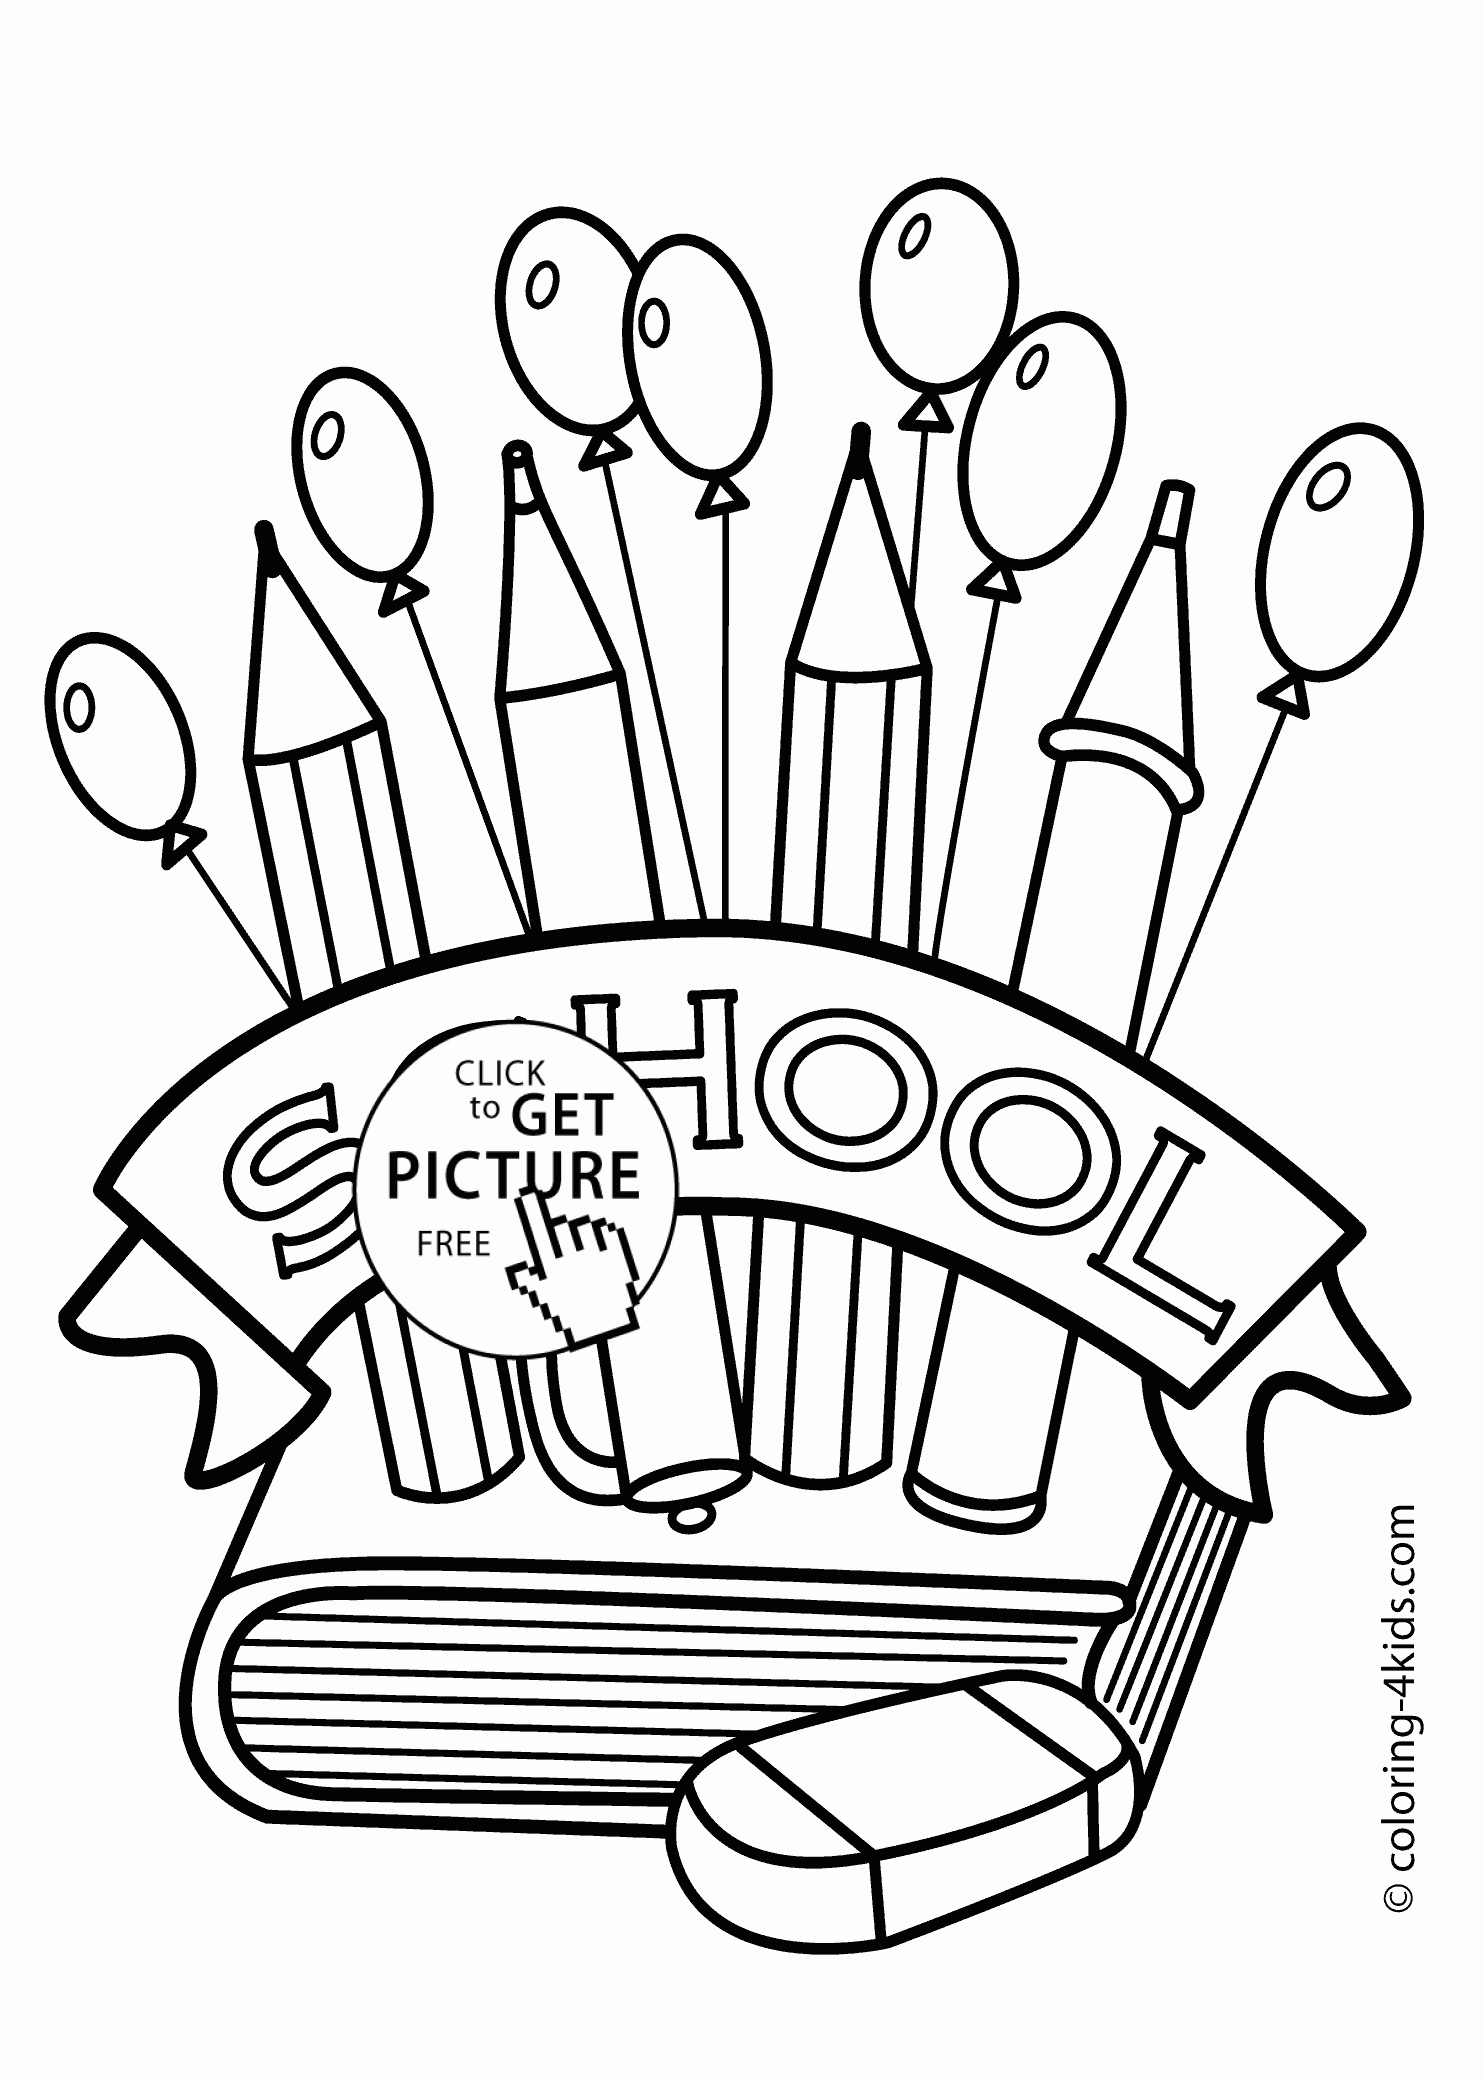 Coloring Ideas : School Remarkableoring Sheets For Kindergarten - Free Printable Coloring Sheets For Back To School